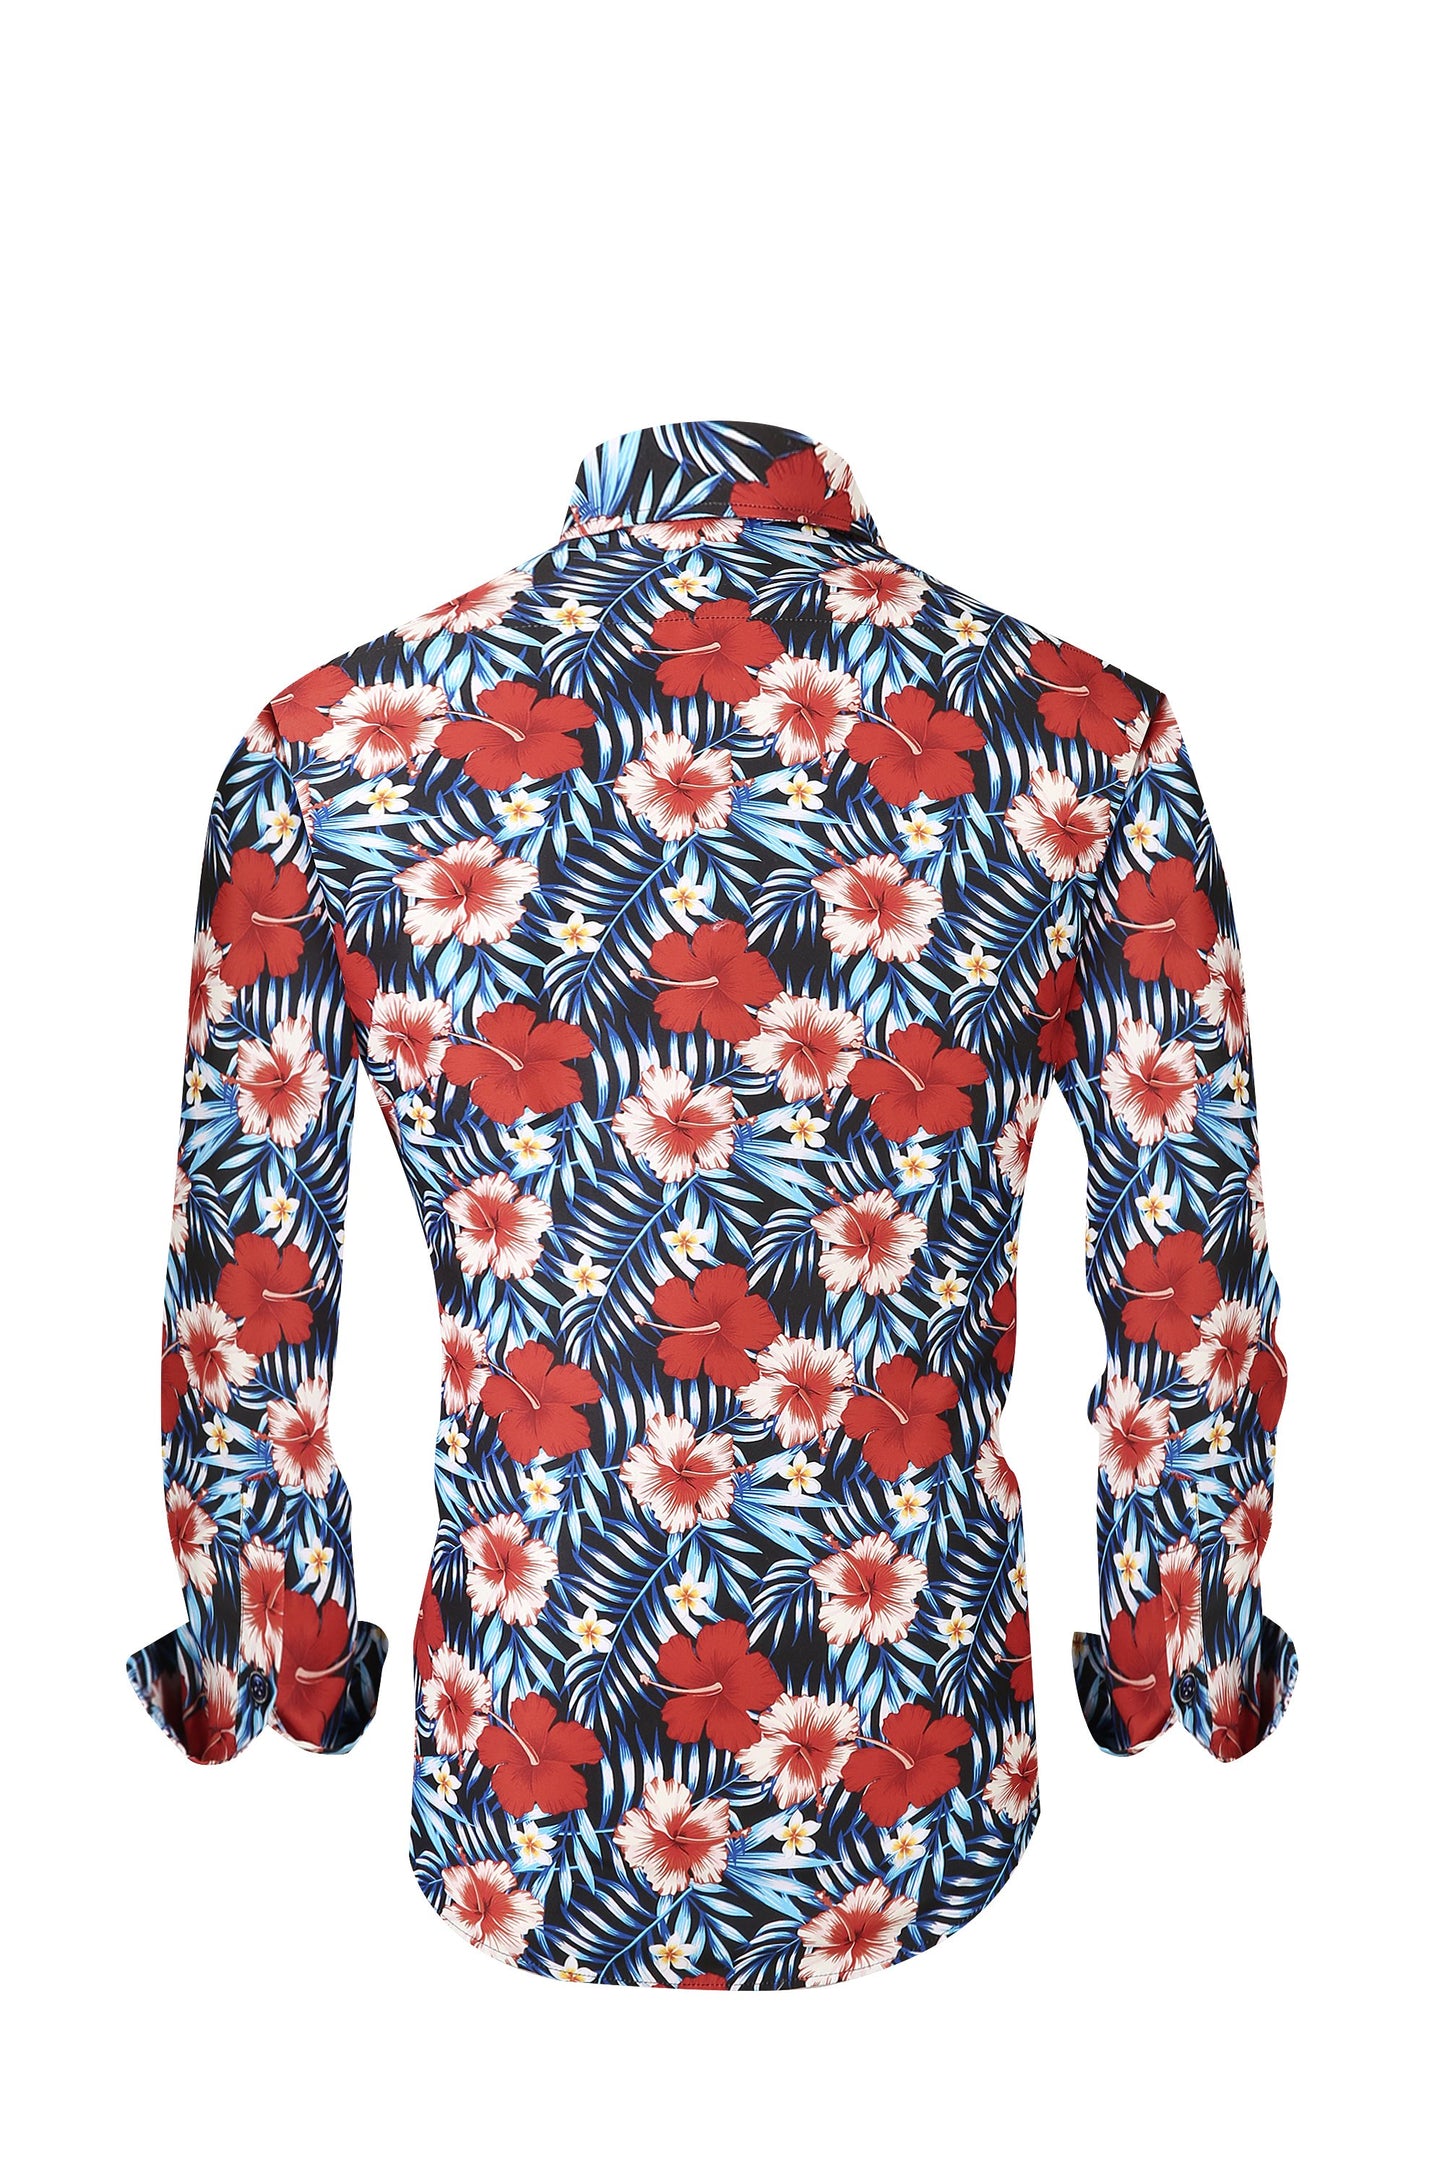 Mens PREMIERE Long Sleeve Button Down Dress Shirt RED BLUE HIBISCUS FLORAL